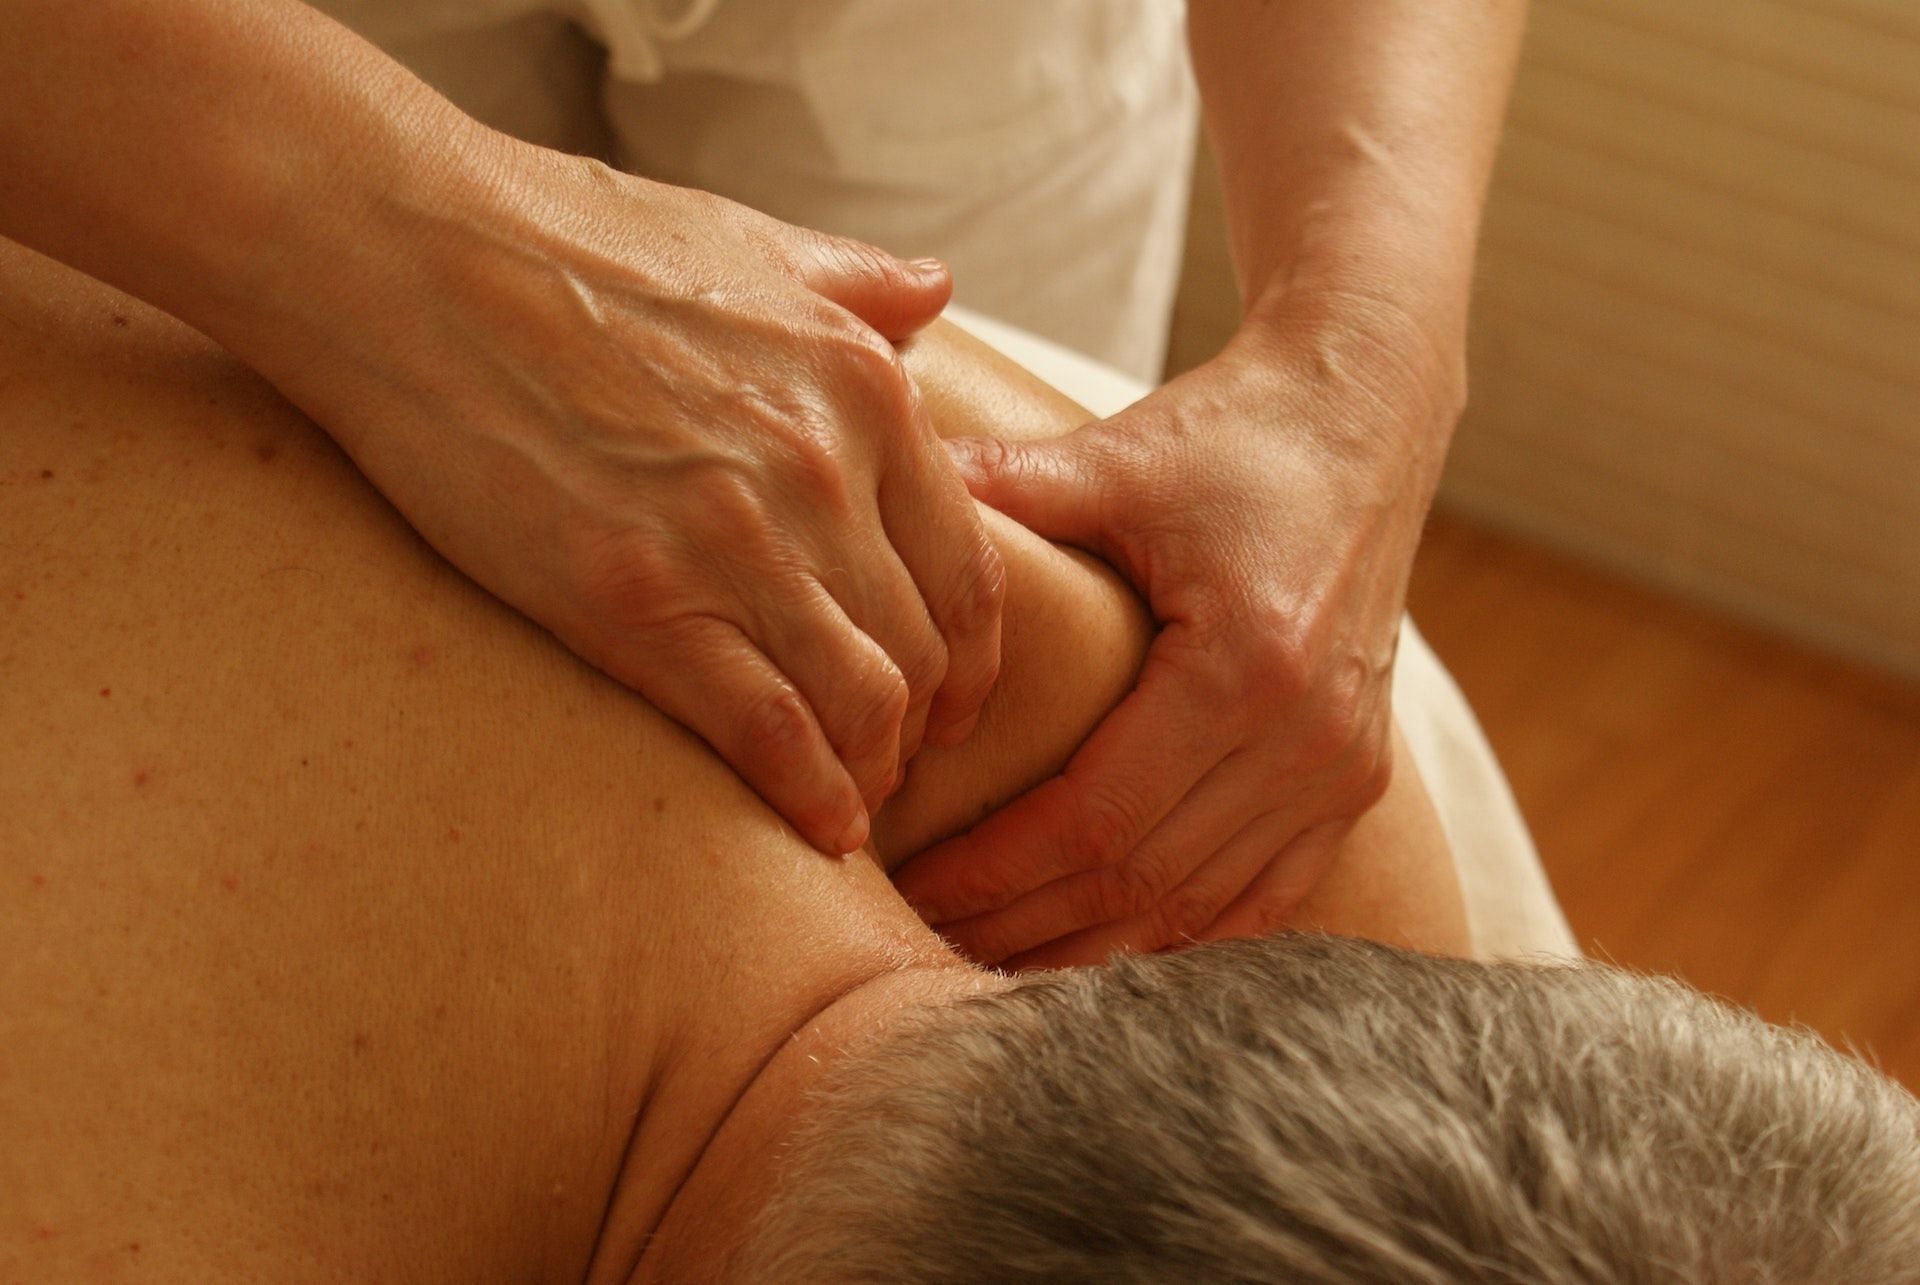 The benefits of deep tissue massage include reducing chronic pain. (Image via Pexels/Pixabay)